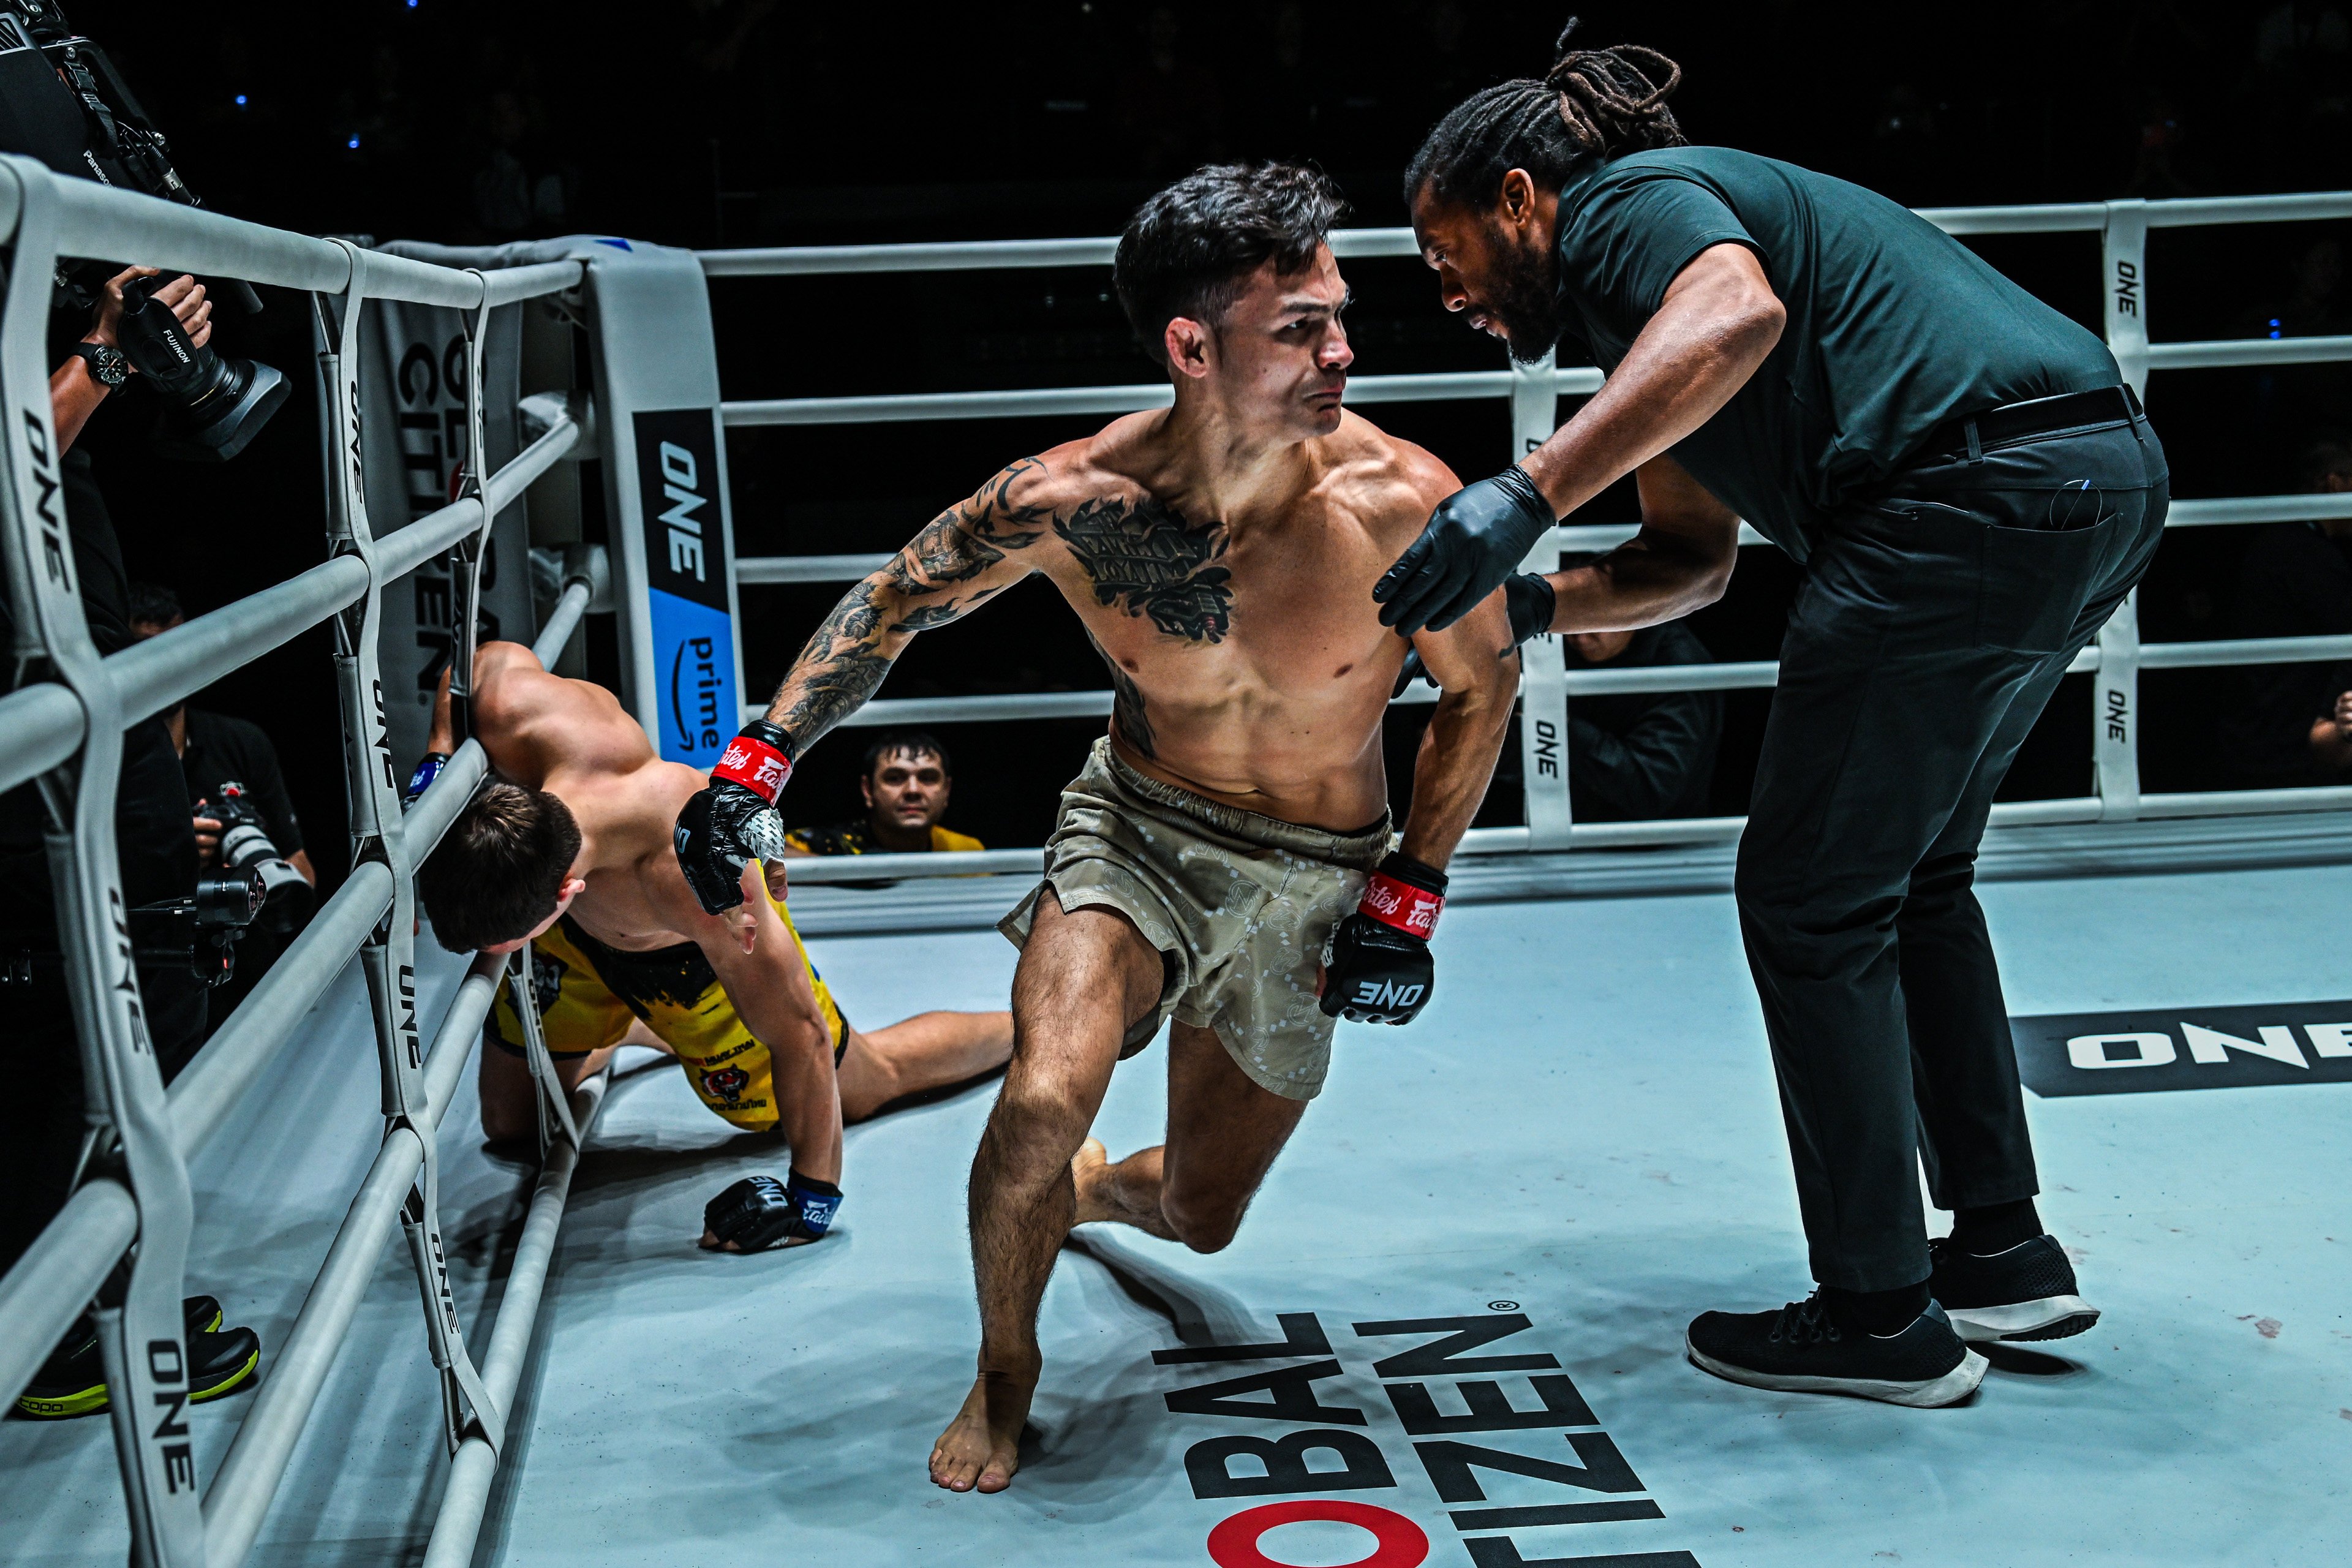 Thanh Le charges off to celebrate after submitting Ilya Freymanov with a leg lock. Photos: ONE Championship